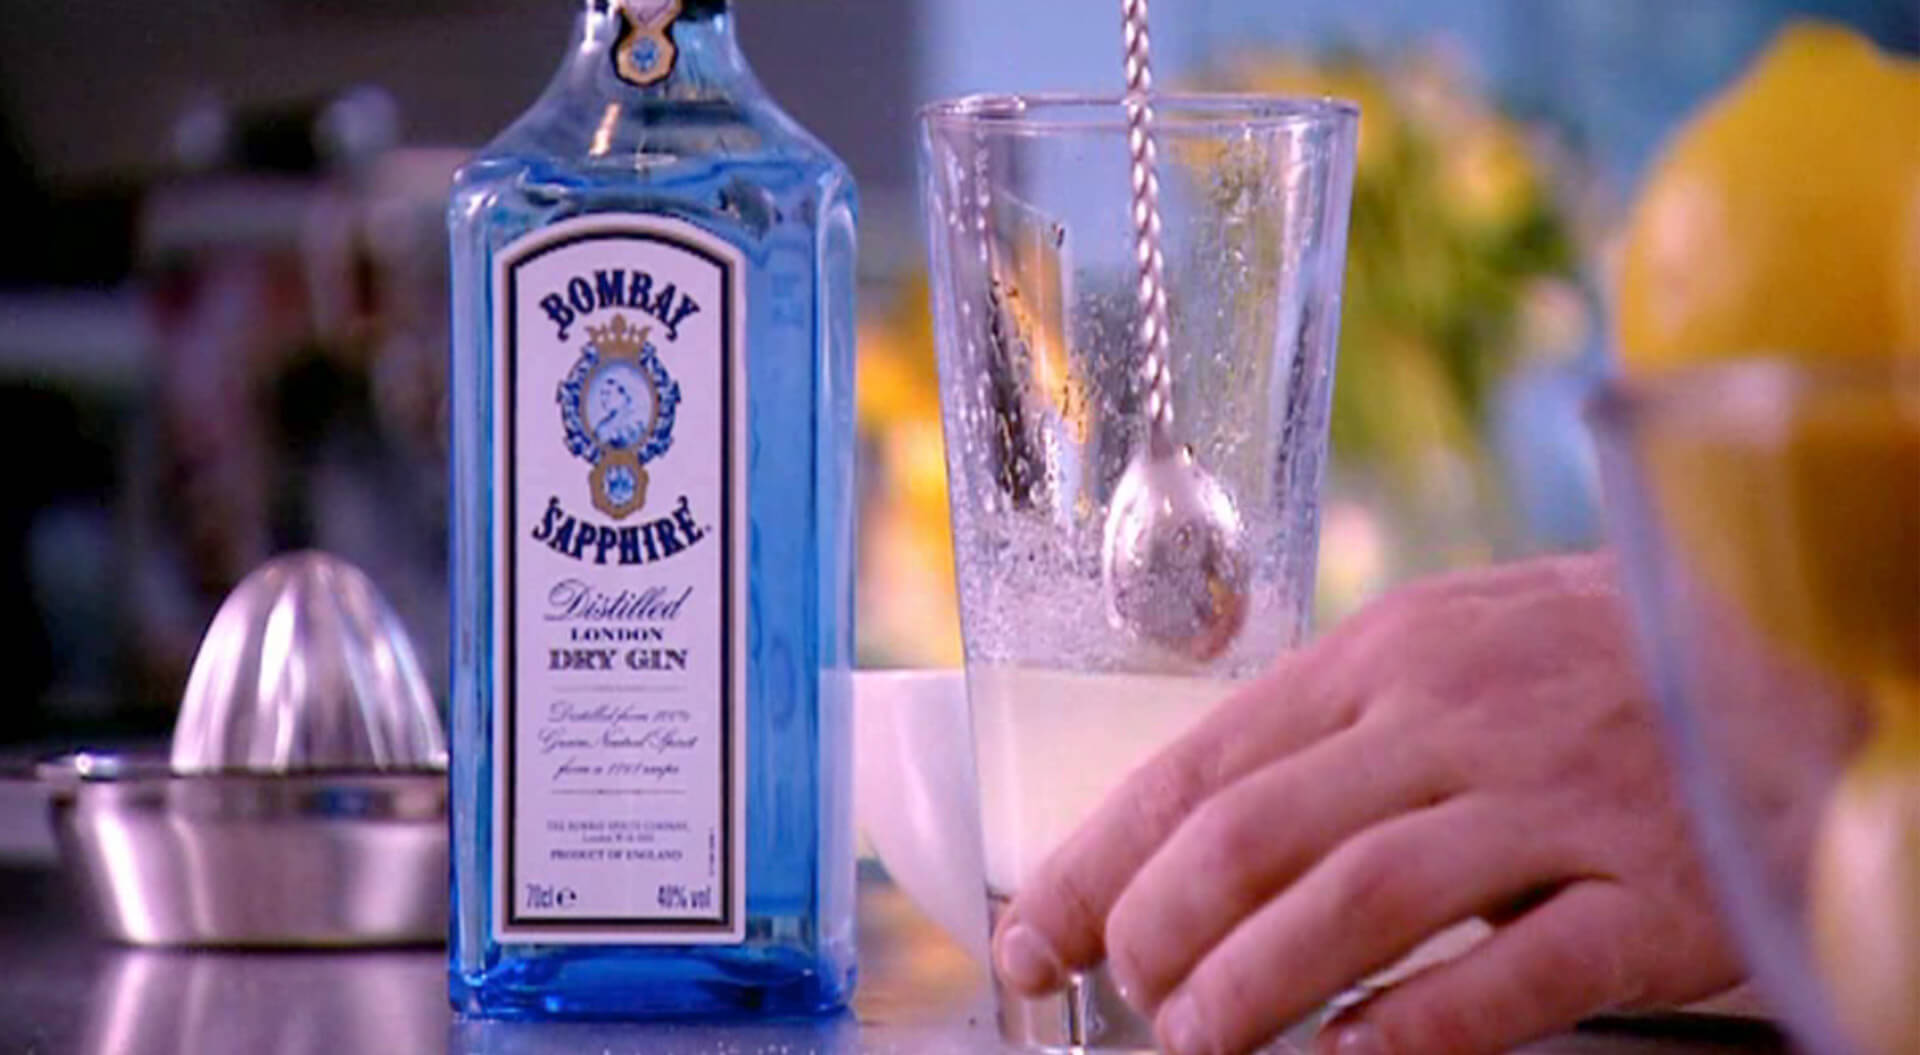 Spirits industry promotion campaigns travel retail, strategy marketing, retail design, airports, duty-free alcohol marketing, innovative concepts ideas Bacardi Global Travel Retail, brand Bombay Sapphire Collins